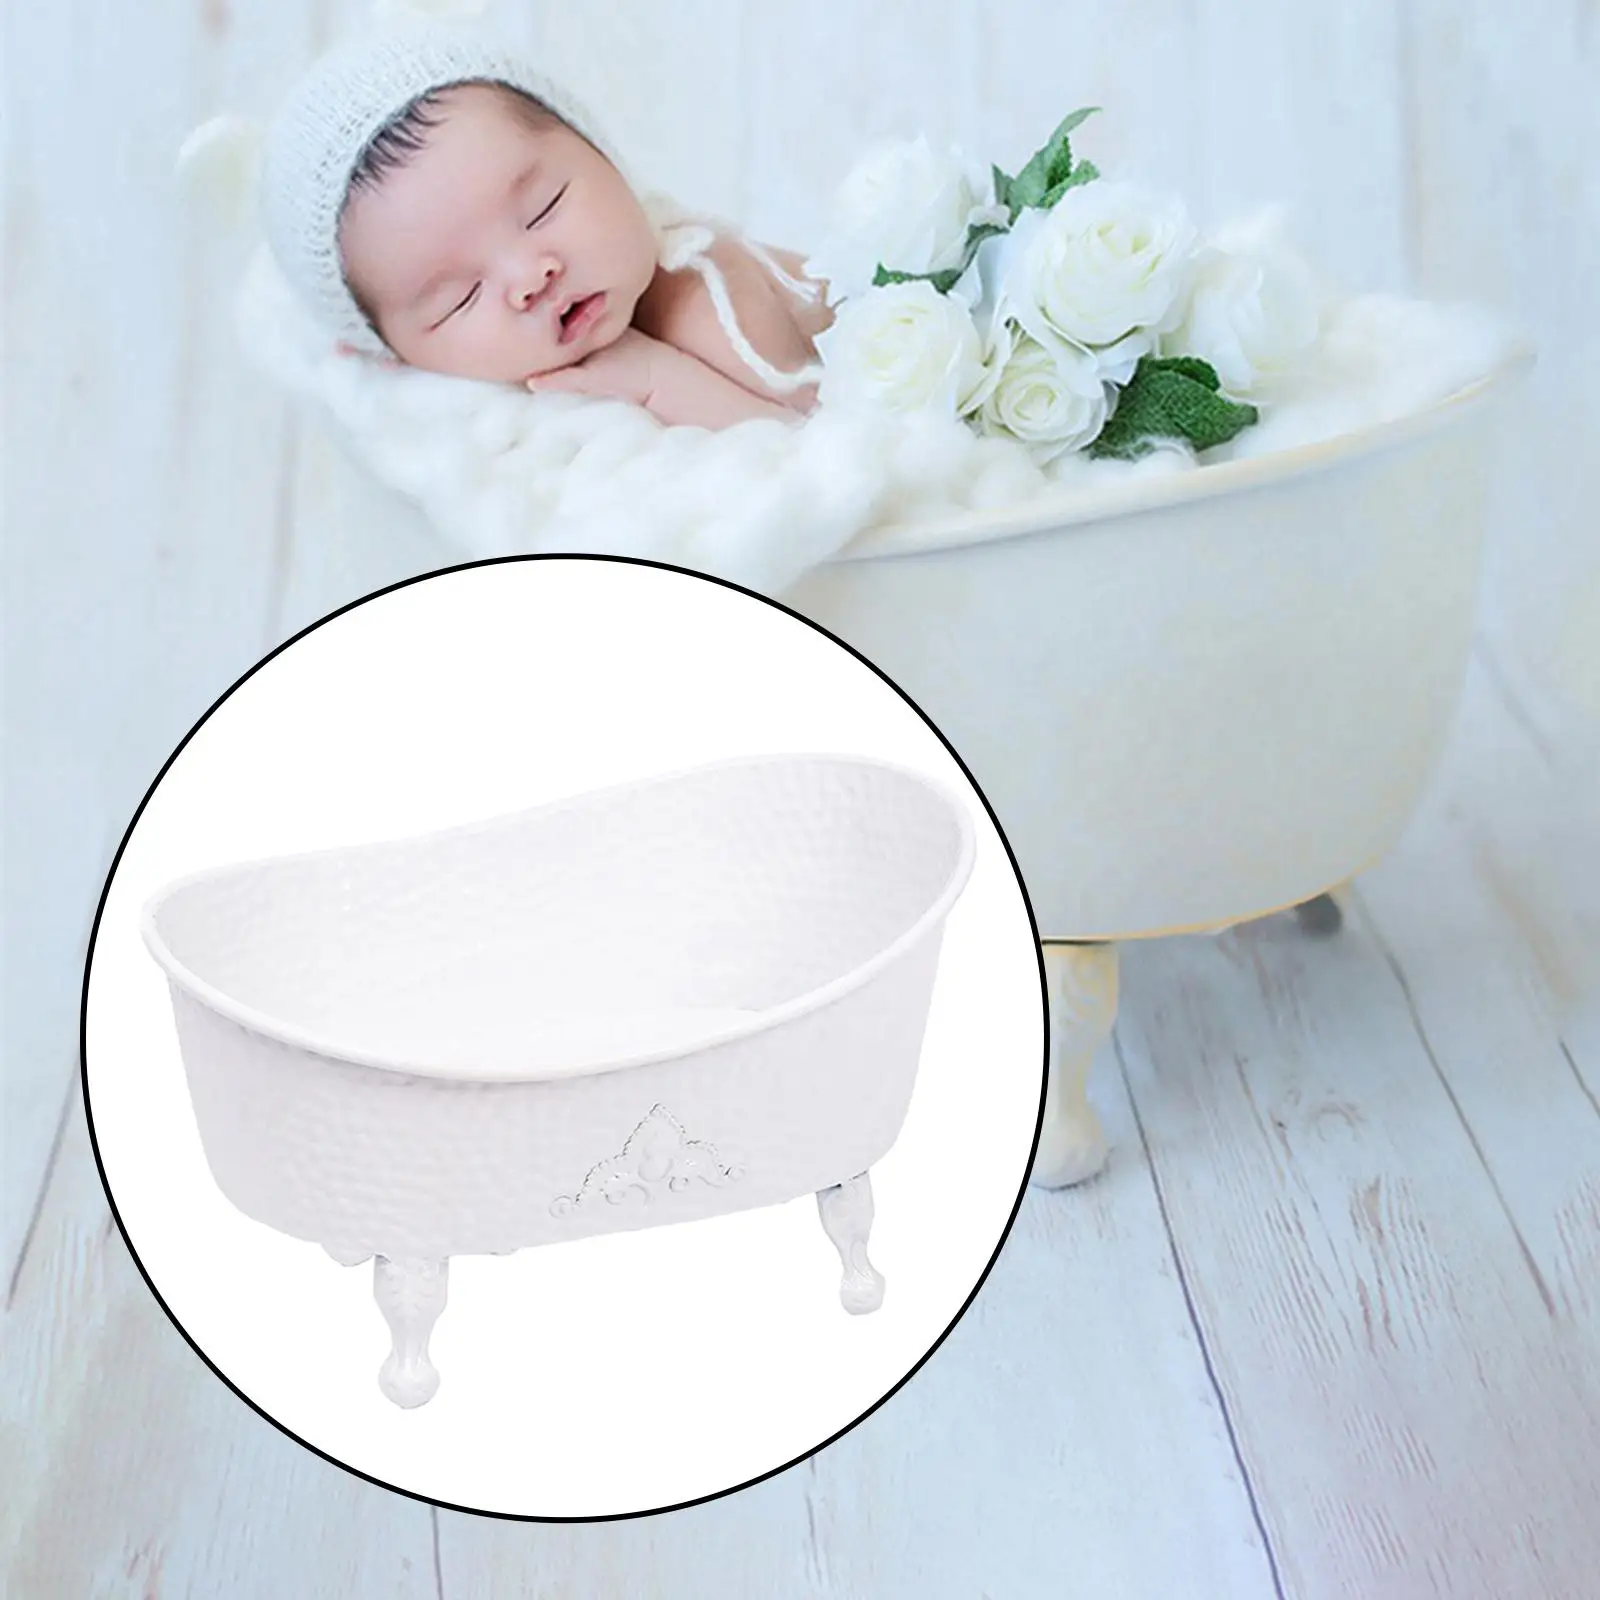 Photo Props Bathtub Ornament Accessory Gifts Furniture White for Birthday